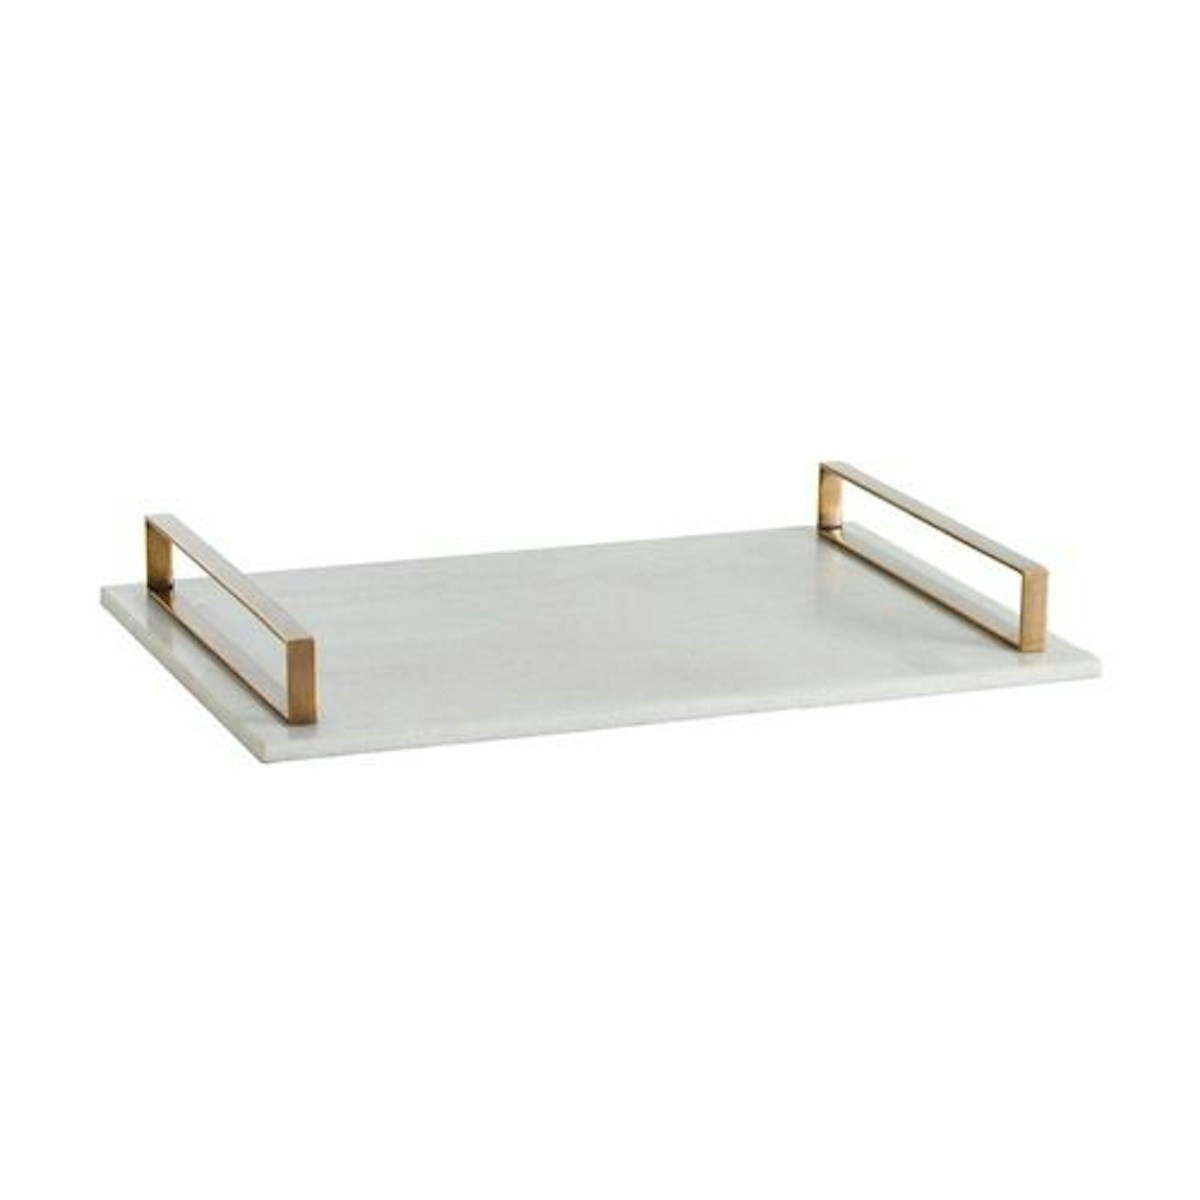 Exton Tray - 21 Best Decorative Trays To Buy For Your Tabletop - LuxDeco.com